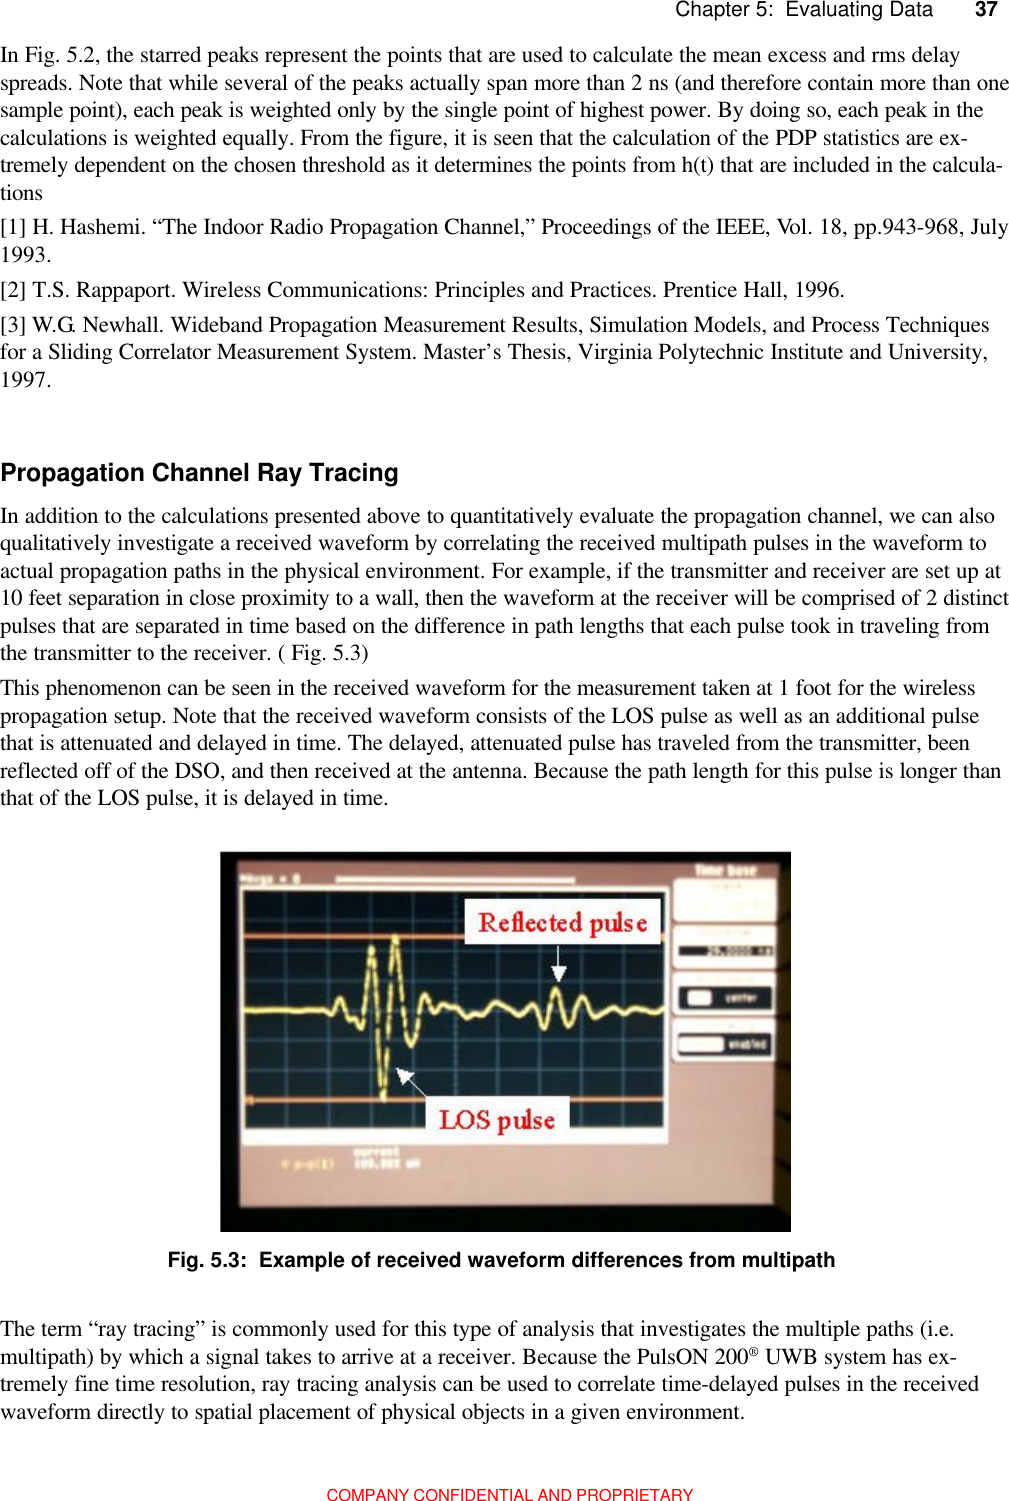 37         Chapter 5:  Evaluating DataCOMPANY CONFIDENTIAL AND PROPRIETARY[1] H. Hashemi. “The Indoor Radio Propagation Channel,” Proceedings of the IEEE, Vol. 18, pp.943-968, July1993.[2] T.S. Rappaport. Wireless Communications: Principles and Practices. Prentice Hall, 1996.[3] W.G. Newhall. Wideband Propagation Measurement Results, Simulation Models, and Process Techniquesfor a Sliding Correlator Measurement System. Master’s Thesis, Virginia Polytechnic Institute and University,1997.In addition to the calculations presented above to quantitatively evaluate the propagation channel, we can alsoqualitatively investigate a received waveform by correlating the received multipath pulses in the waveform toactual propagation paths in the physical environment. For example, if the transmitter and receiver are set up at10 feet separation in close proximity to a wall, then the waveform at the receiver will be comprised of 2 distinctpulses that are separated in time based on the difference in path lengths that each pulse took in traveling fromthe transmitter to the receiver. ( Fig. 5.3)This phenomenon can be seen in the received waveform for the measurement taken at 1 foot for the wirelesspropagation setup. Note that the received waveform consists of the LOS pulse as well as an additional pulsethat is attenuated and delayed in time. The delayed, attenuated pulse has traveled from the transmitter, beenreflected off of the DSO, and then received at the antenna. Because the path length for this pulse is longer thanthat of the LOS pulse, it is delayed in time.In Fig. 5.2, the starred peaks represent the points that are used to calculate the mean excess and rms delayspreads. Note that while several of the peaks actually span more than 2 ns (and therefore contain more than onesample point), each peak is weighted only by the single point of highest power. By doing so, each peak in thecalculations is weighted equally. From the figure, it is seen that the calculation of the PDP statistics are ex-tremely dependent on the chosen threshold as it determines the points from h(t) that are included in the calcula-tionsPropagation Channel Ray TracingFig. 5.3:  Example of received waveform differences from multipathThe term “ray tracing” is commonly used for this type of analysis that investigates the multiple paths (i.e.multipath) by which a signal takes to arrive at a receiver. Because the PulsON 200® UWB system has ex-tremely fine time resolution, ray tracing analysis can be used to correlate time-delayed pulses in the receivedwaveform directly to spatial placement of physical objects in a given environment.